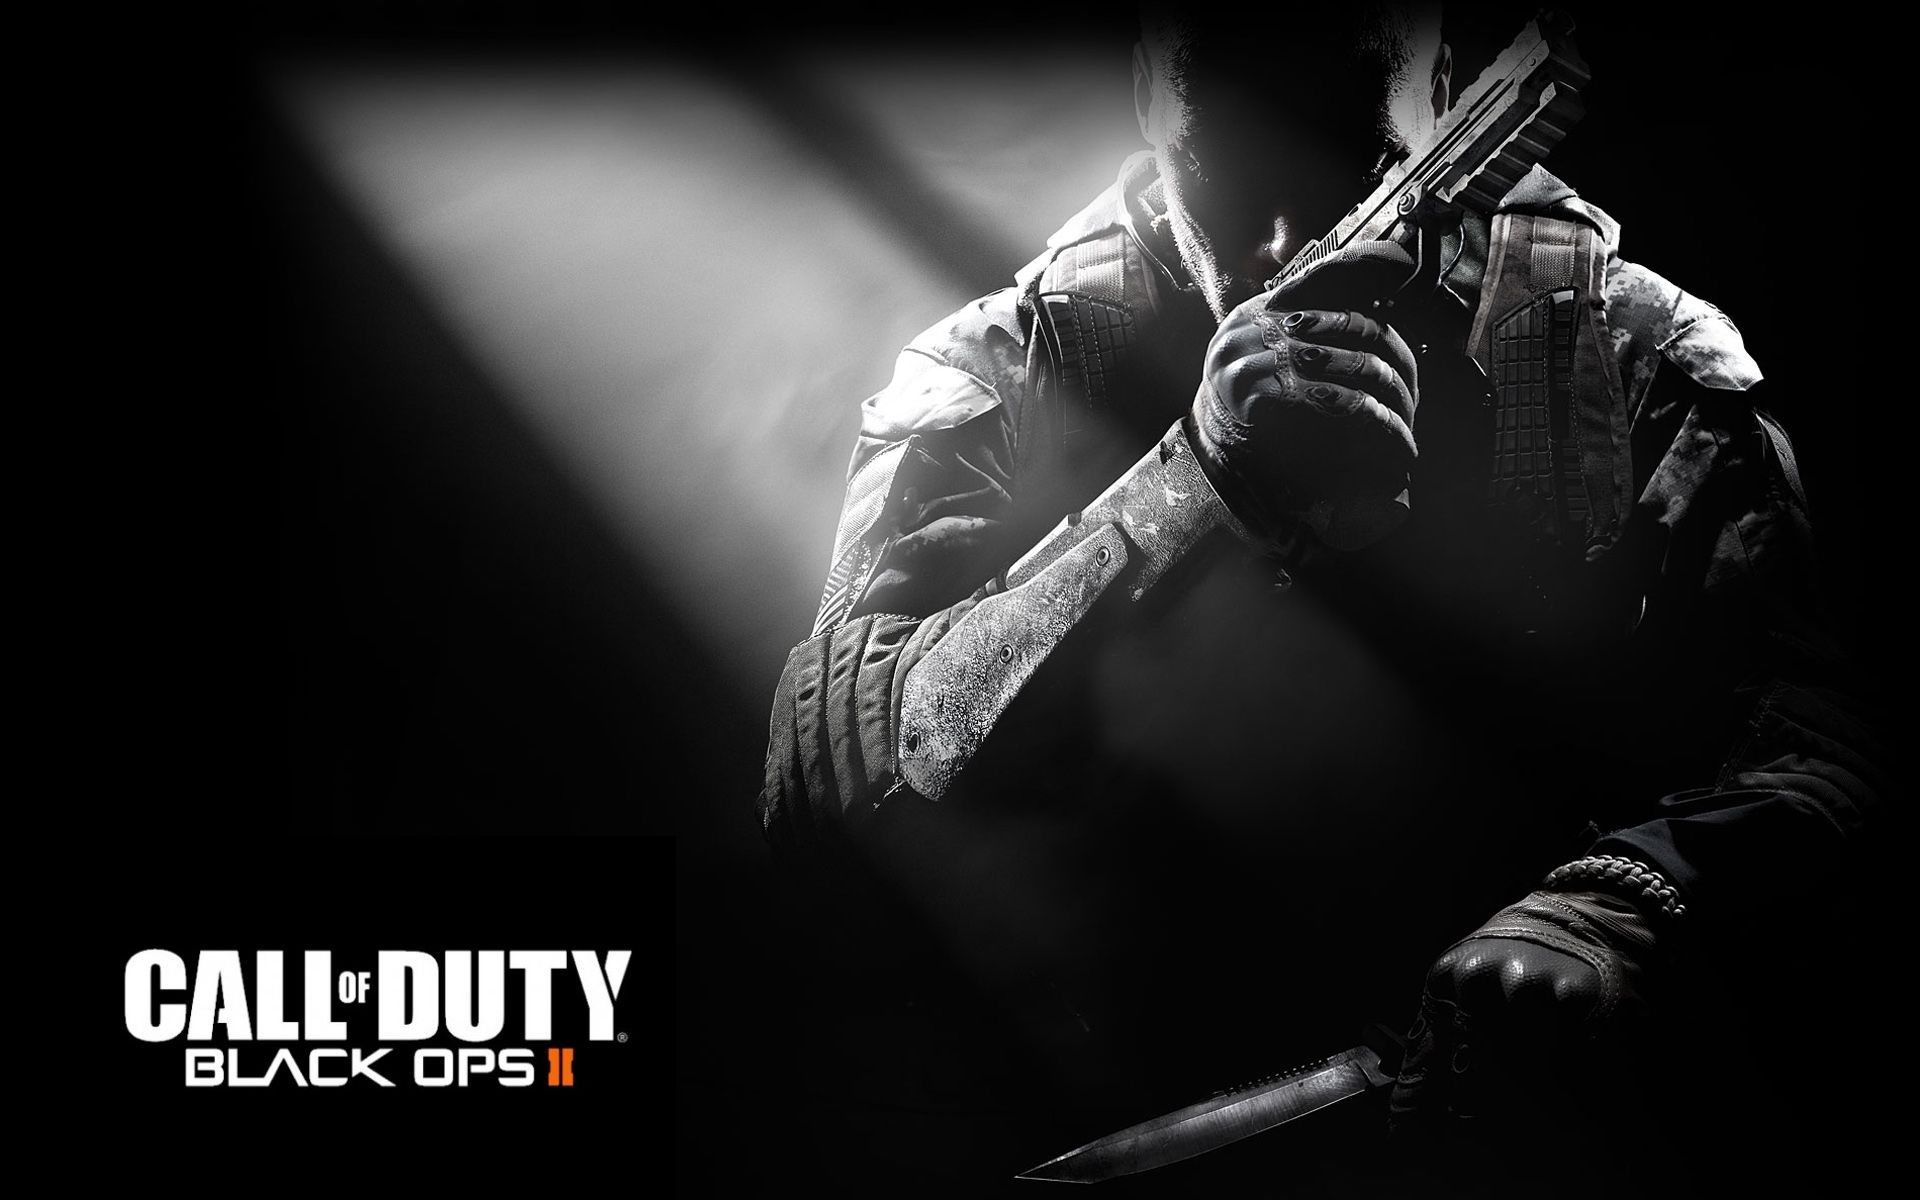 Call of Duty Black Ops 2 Wallpapers HD Backgrounds